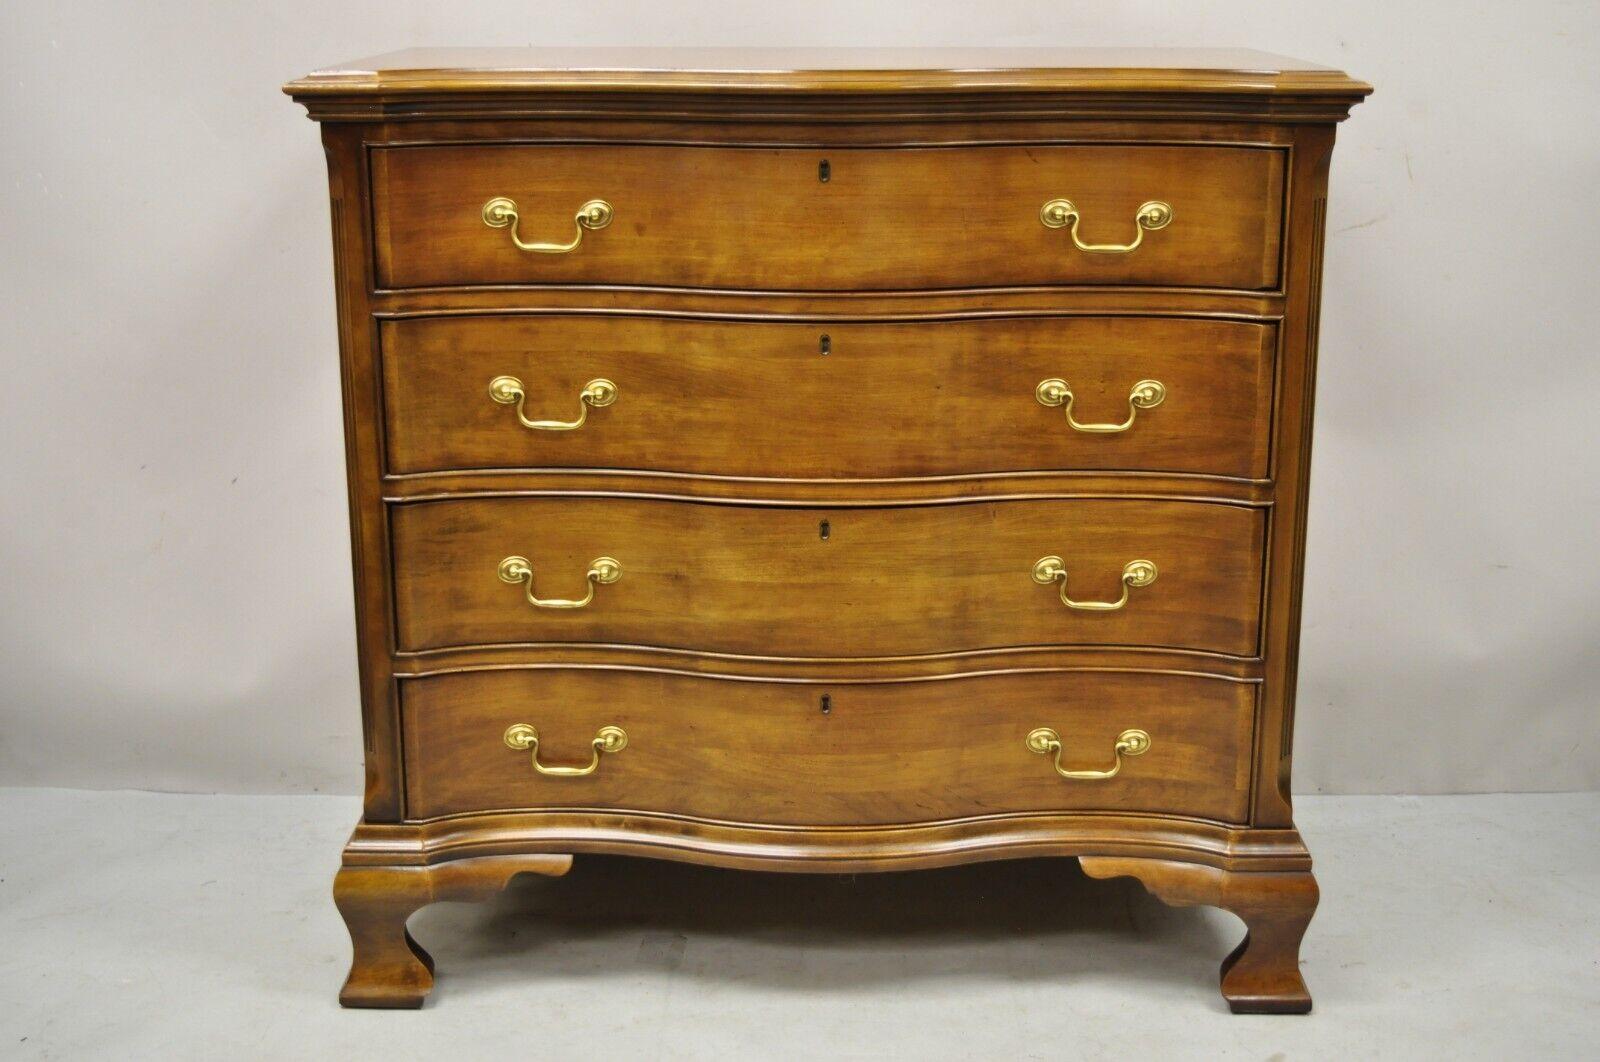 Century Furn, American Life Collection Henry Ford Museum Cherry 4 Drawer Chest 6